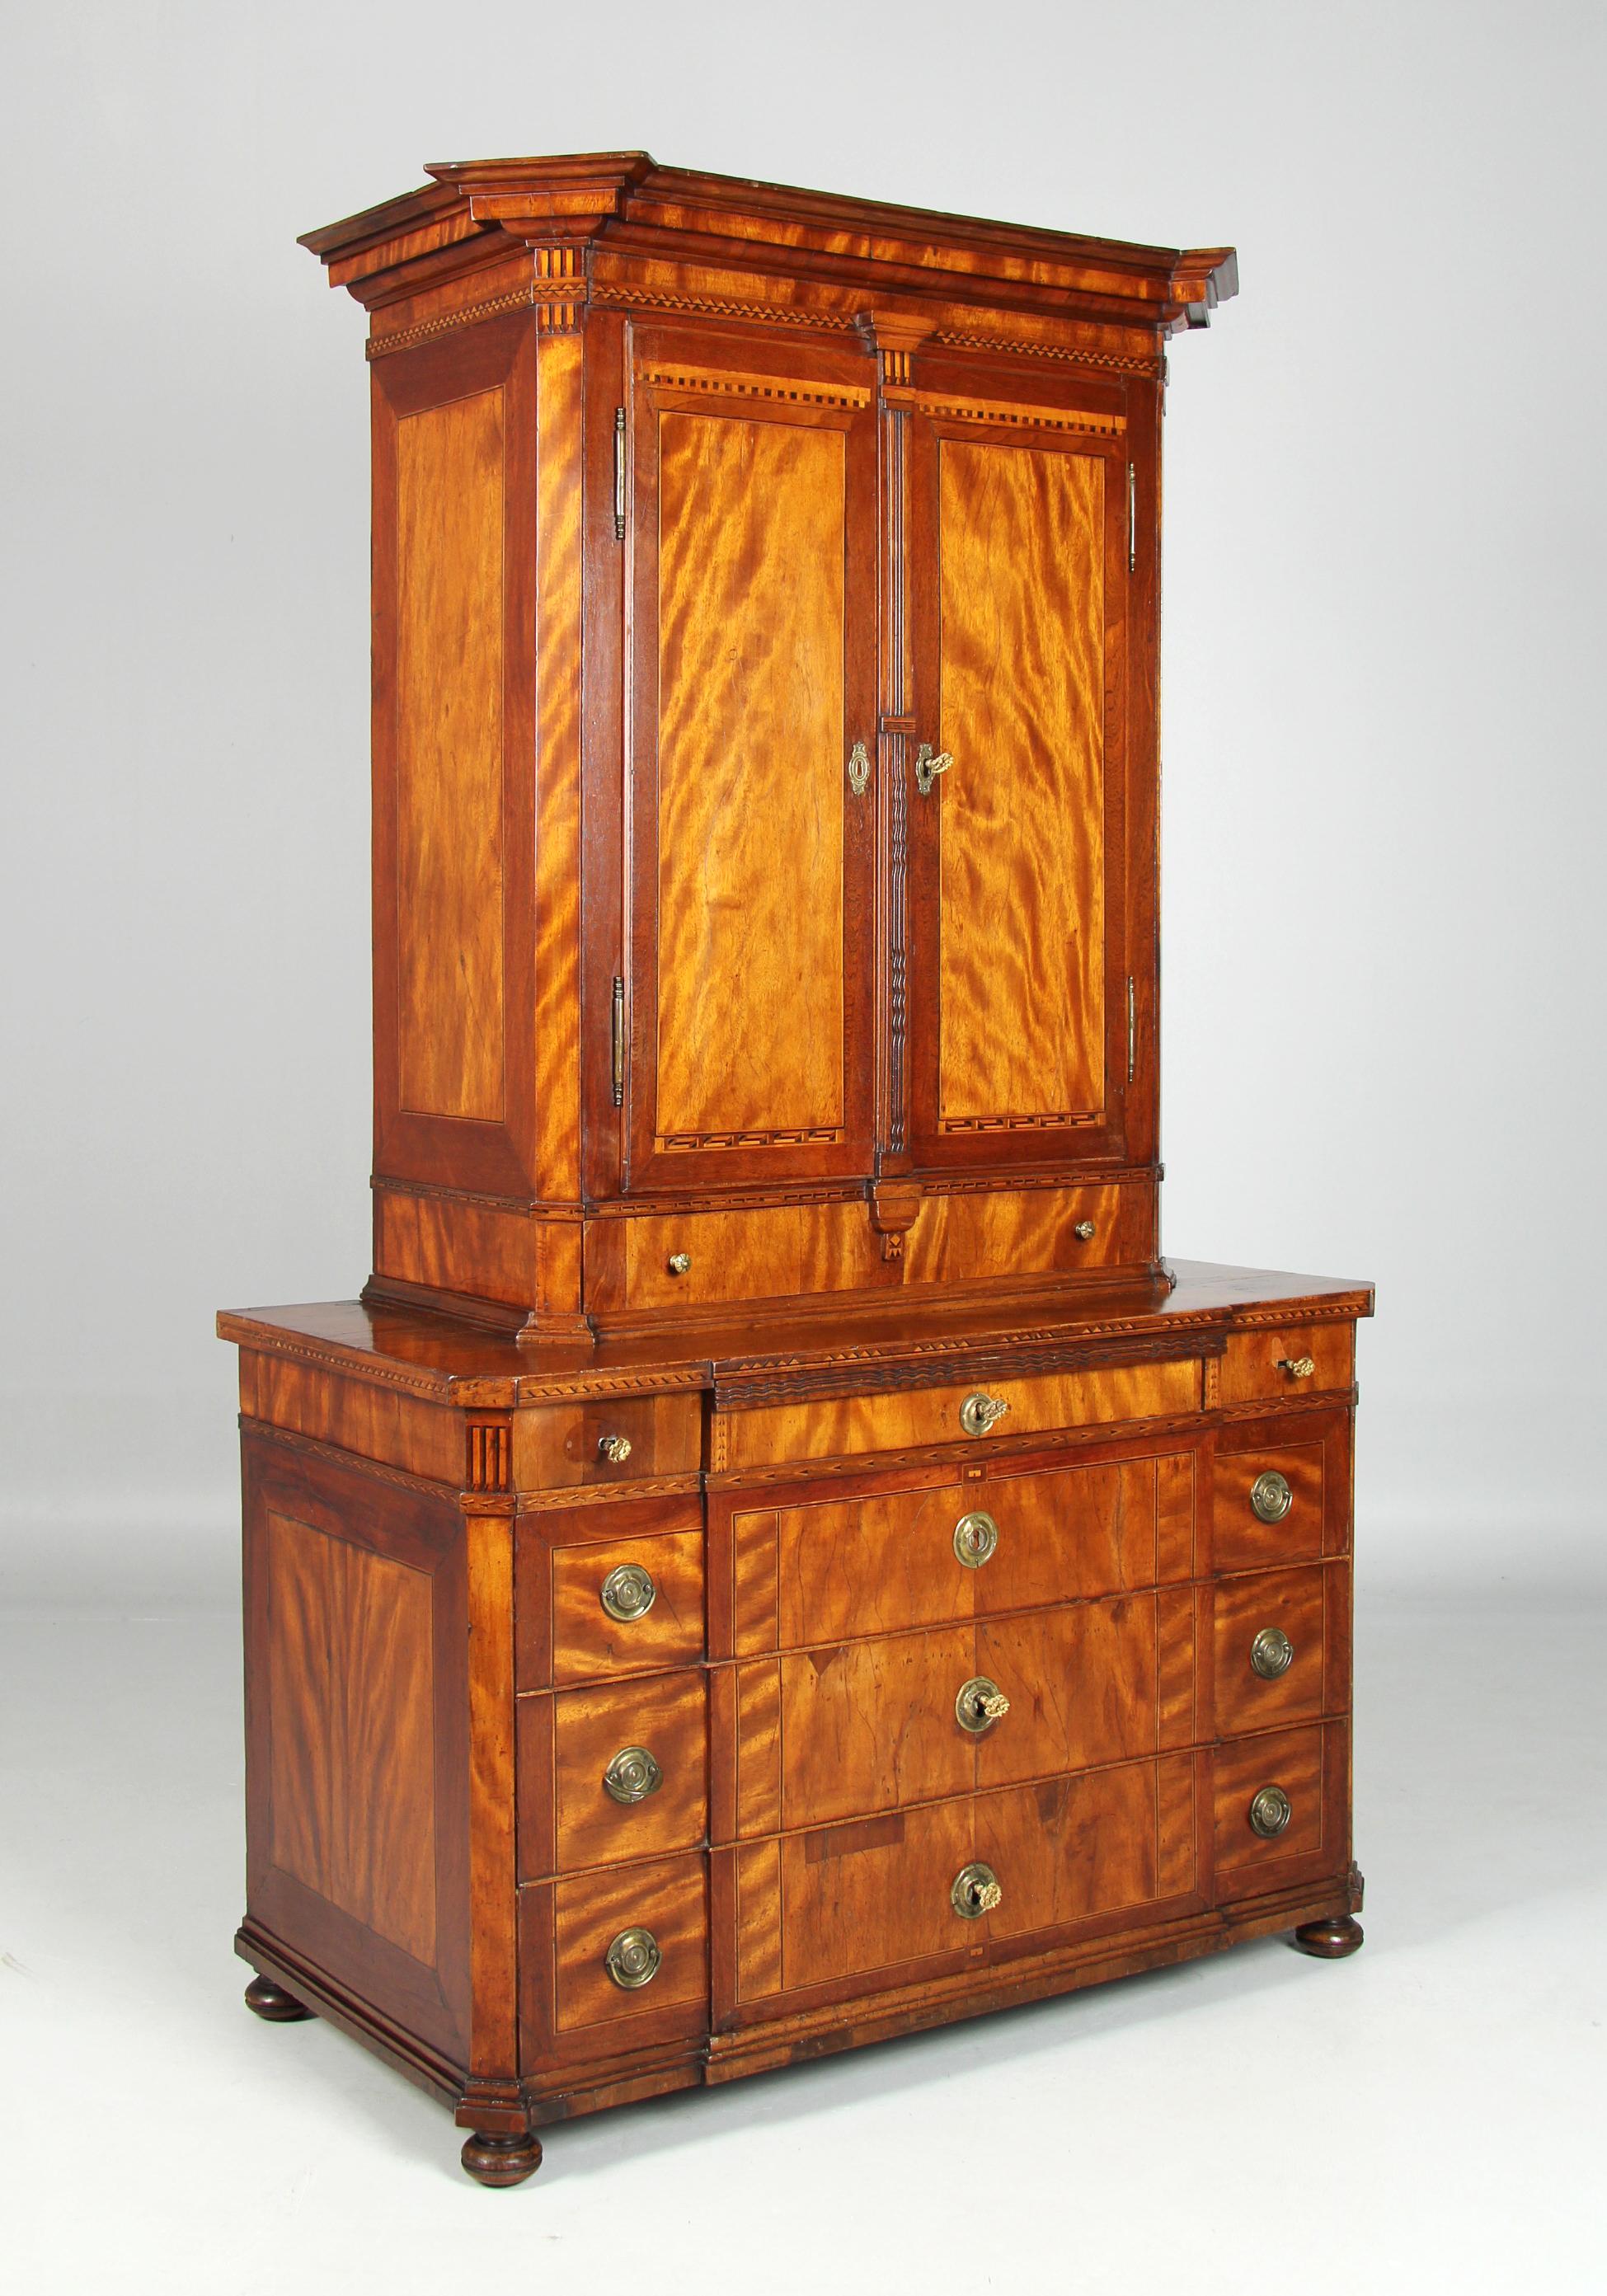 Louis XVI top-mounted furniture in patina condition

The Netherlands
Satinwood, mahogany and others
Louis XVI around 1780

Dimensions: H x W x D: 203 x 124 x 63 cm

Description:
Chest of drawers on ball feet with corner pilaster strips and a wide